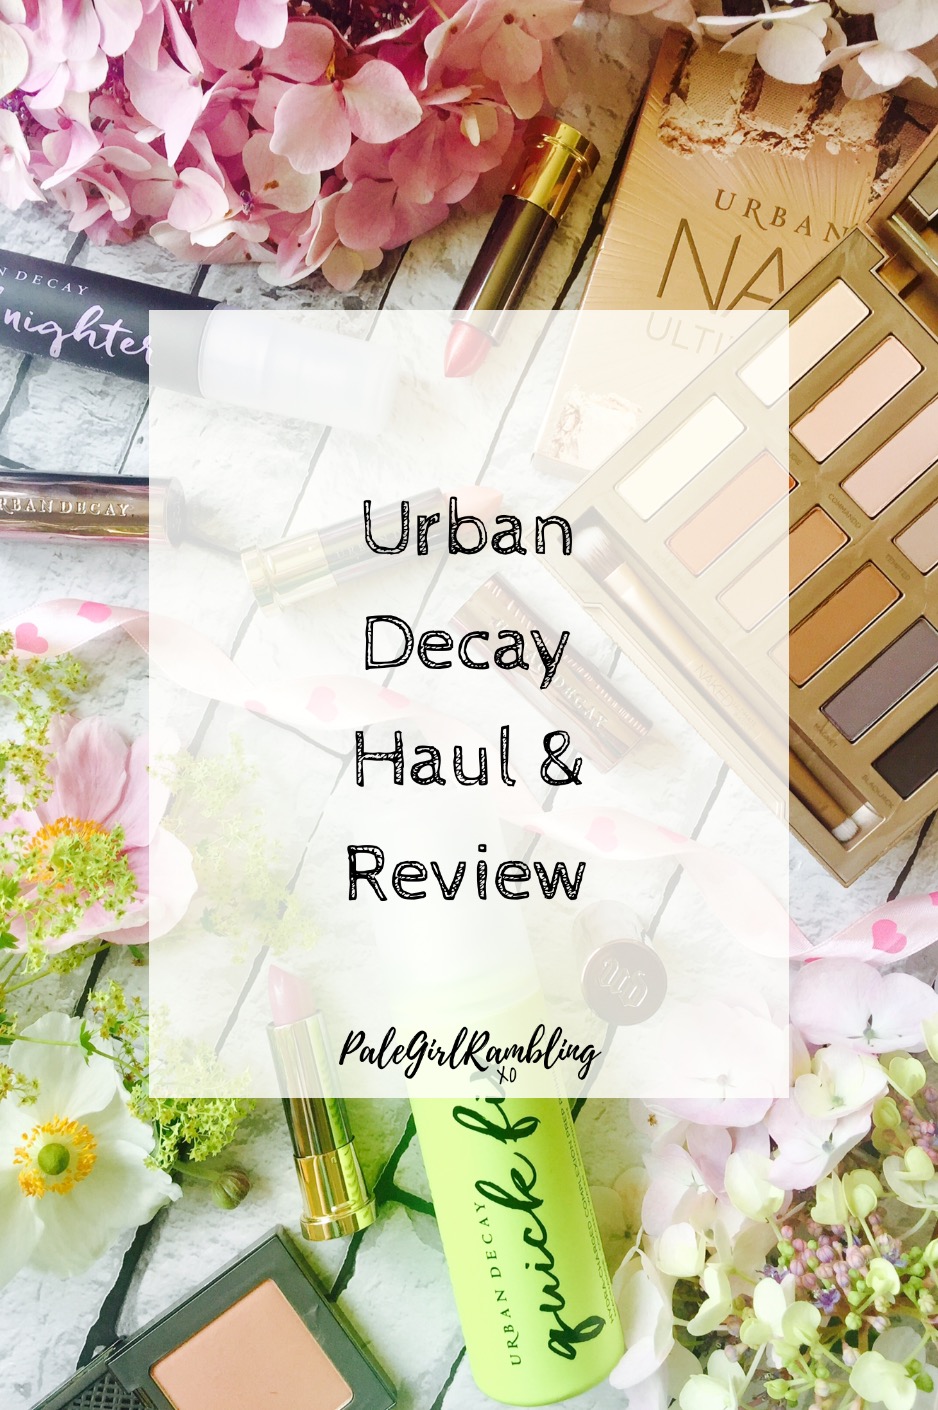 Urban Decay Haul and review all Nighter setting spray prep spray primer naked Ultimate Basics palette Vice lipsticks swatches